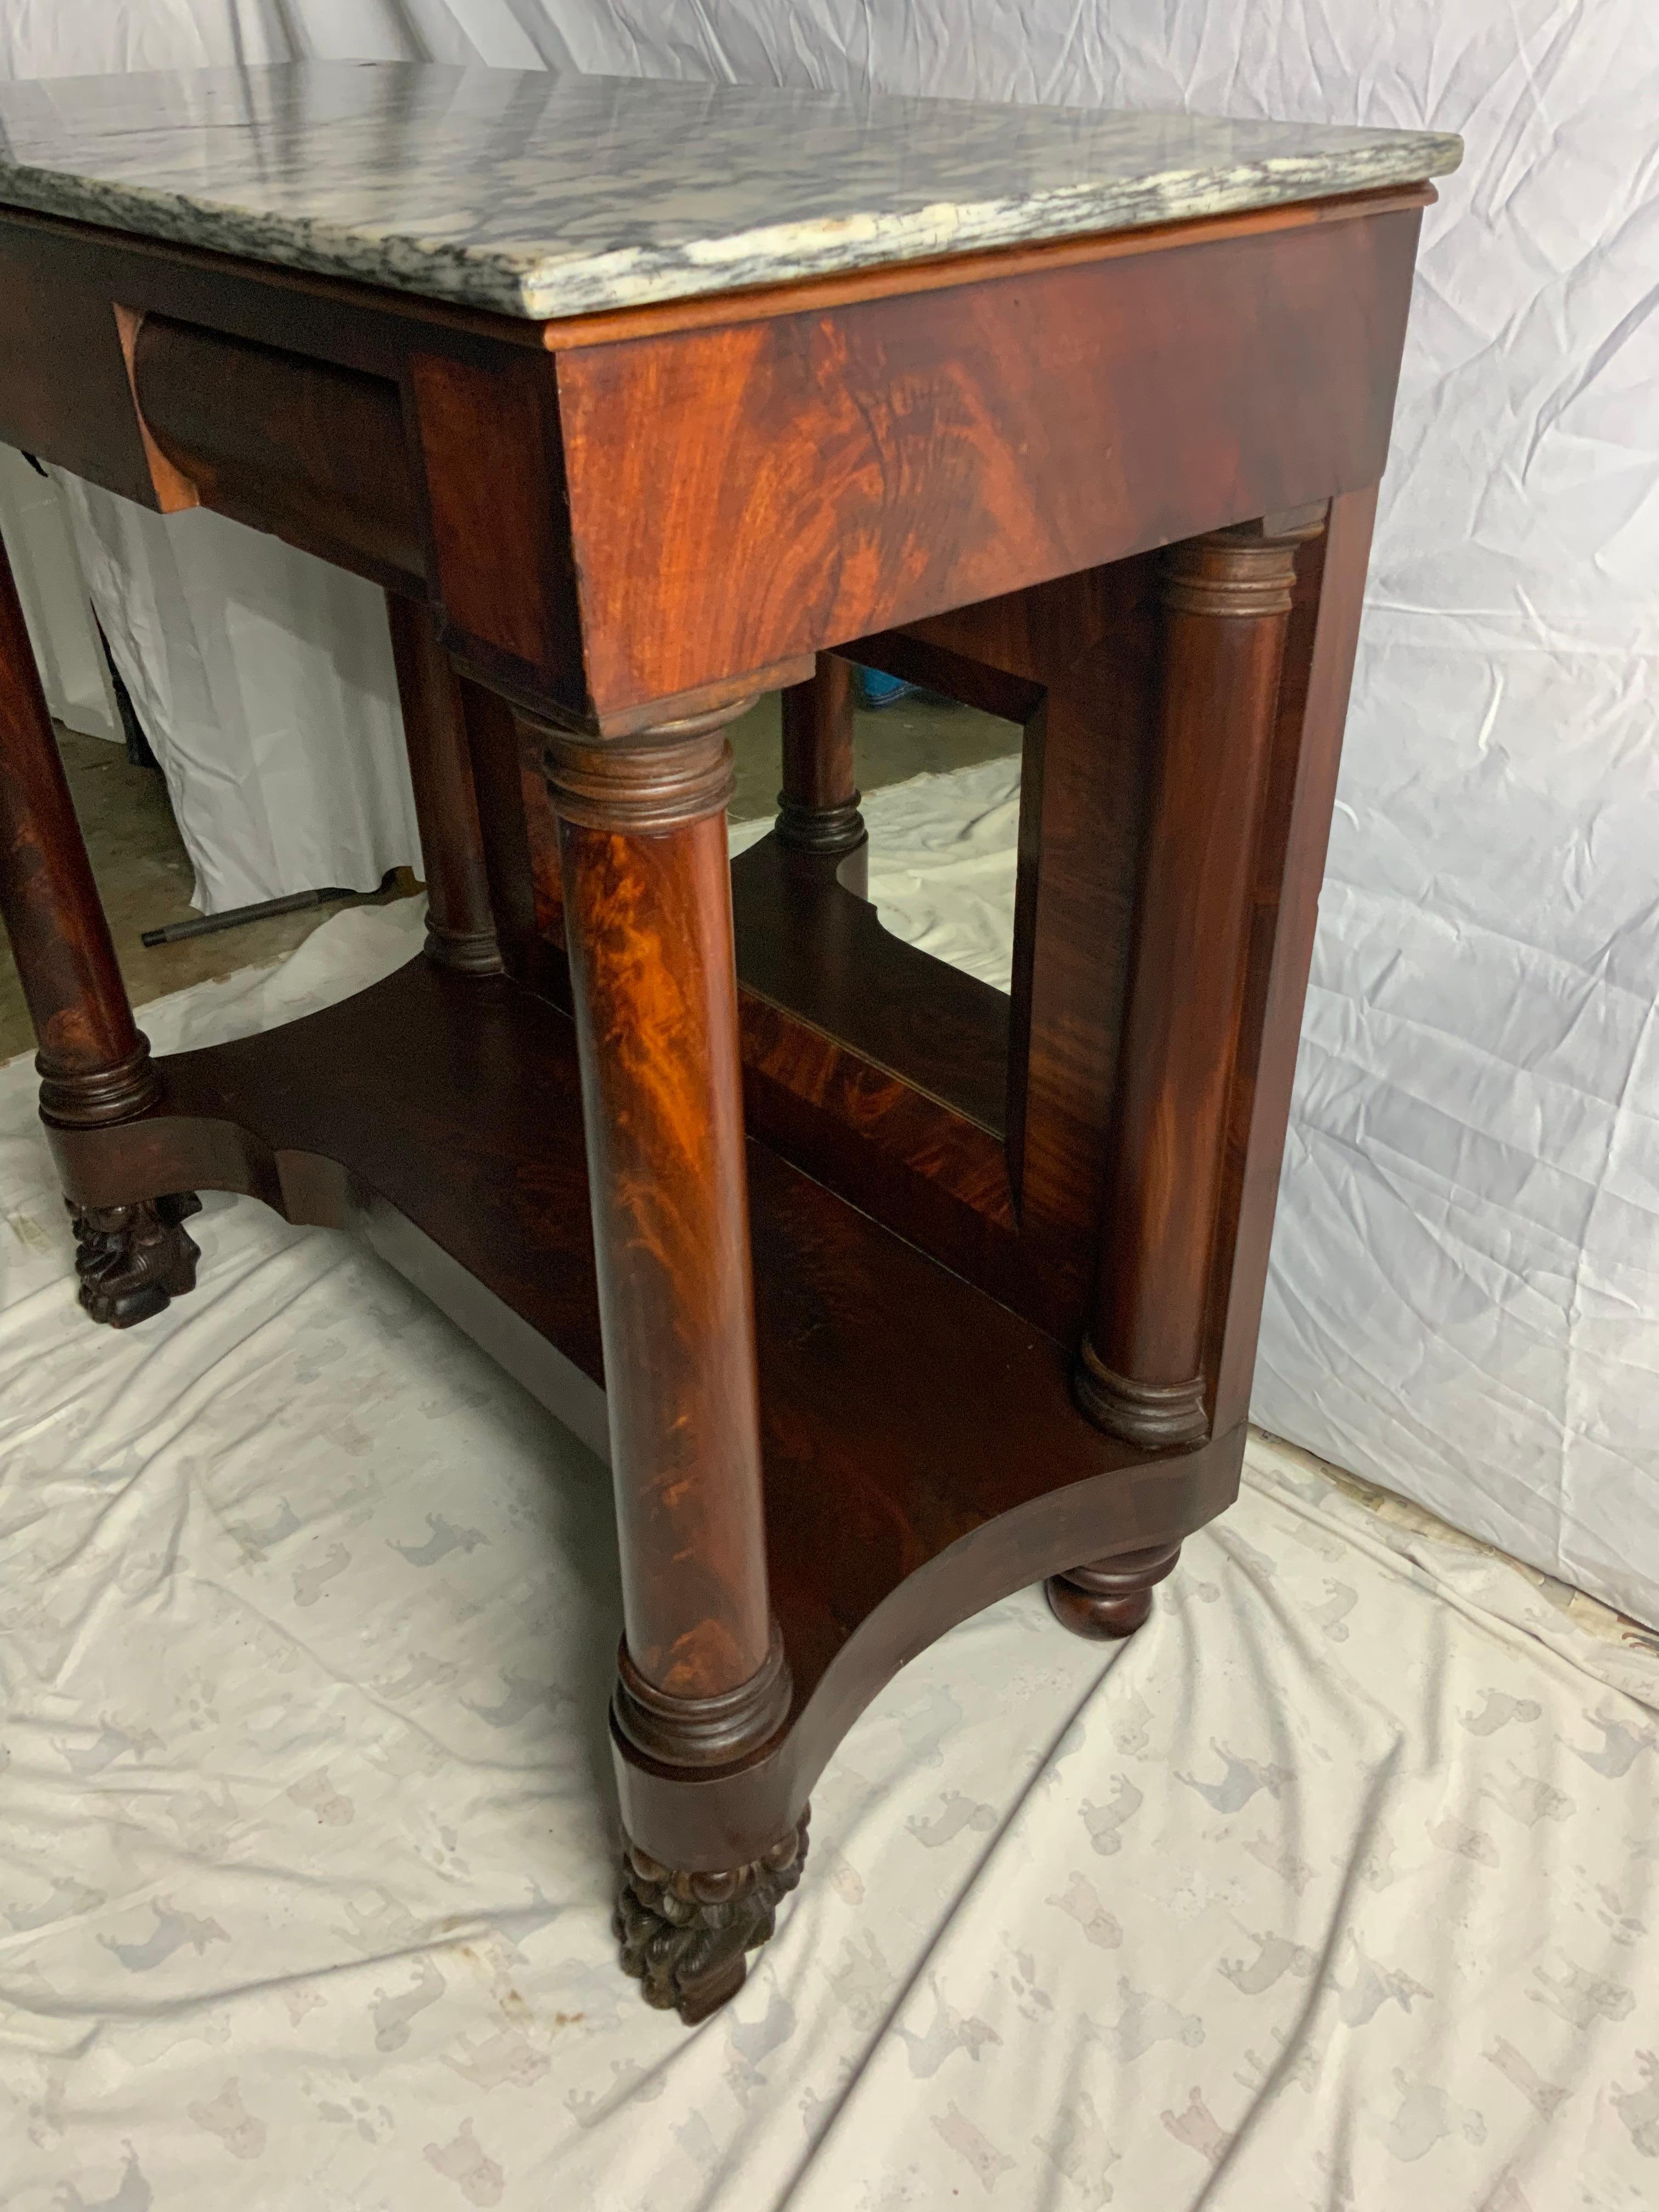 Early Empire Mahogany Pier Table with the original marble. Nicely carved hairy paw feet sitting under the turned crotch Mahogany veneered columns under a banded inlay frieze. Old, possibly original surface, veneer repairs to the bottom shelf, mirror